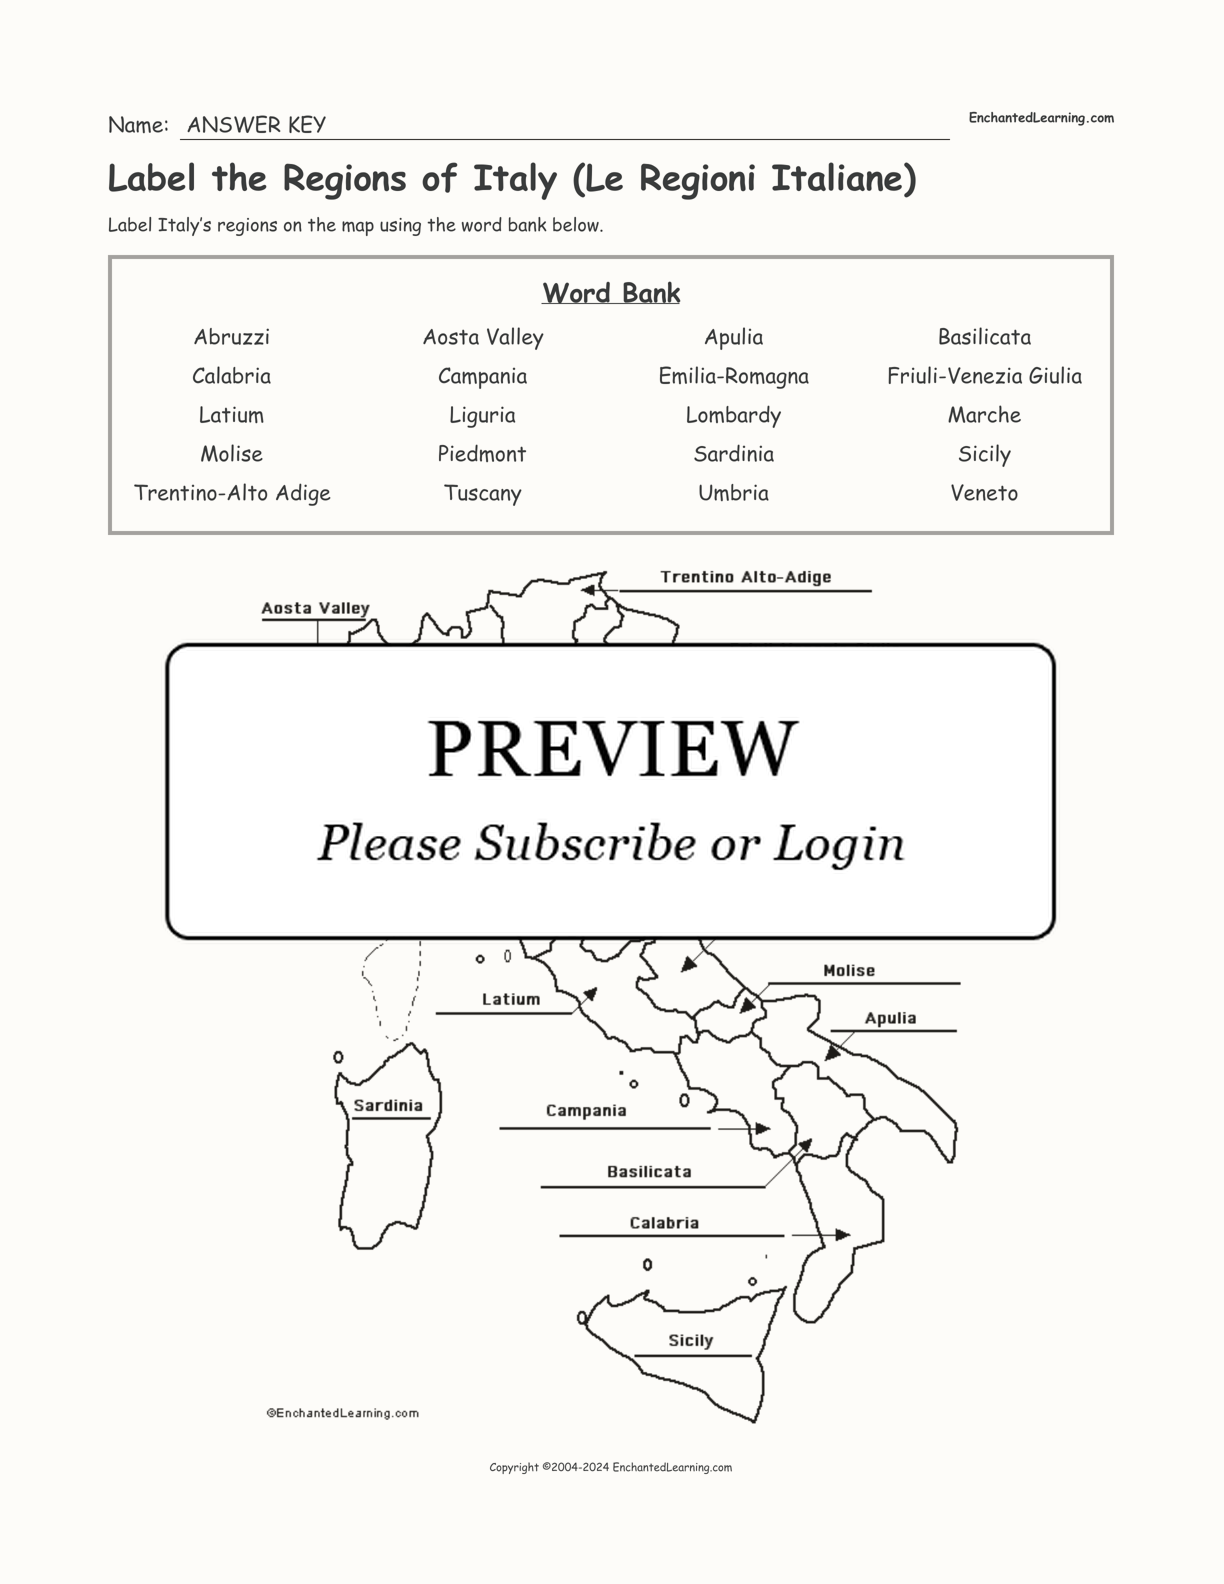 Label the Regions of Italy (Le Regioni Italiane) interactive worksheet page 2